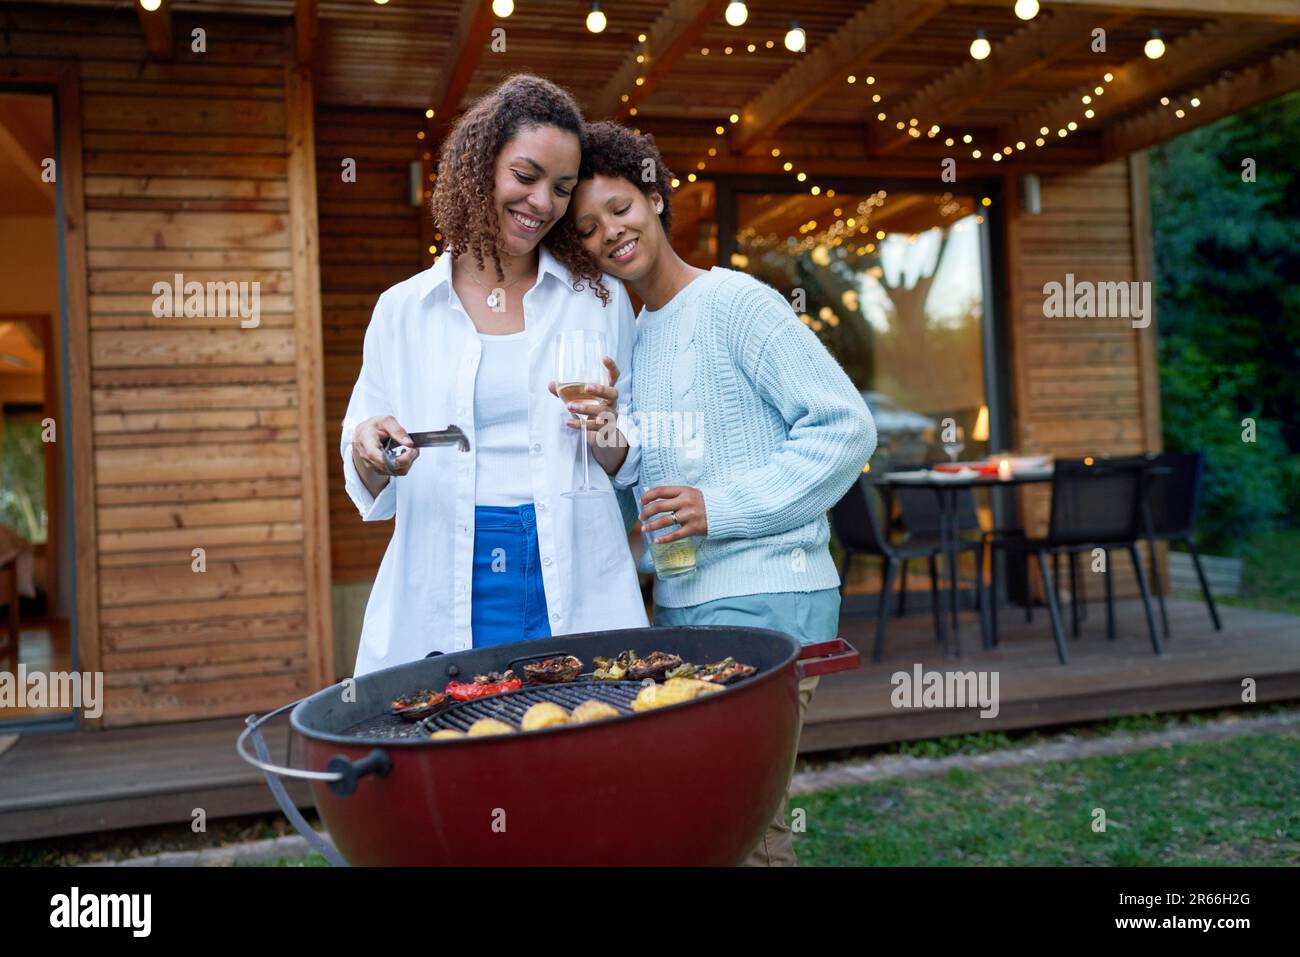 Happy, affectionate lesbian couple barbecuing in summer backyard Stock Photo